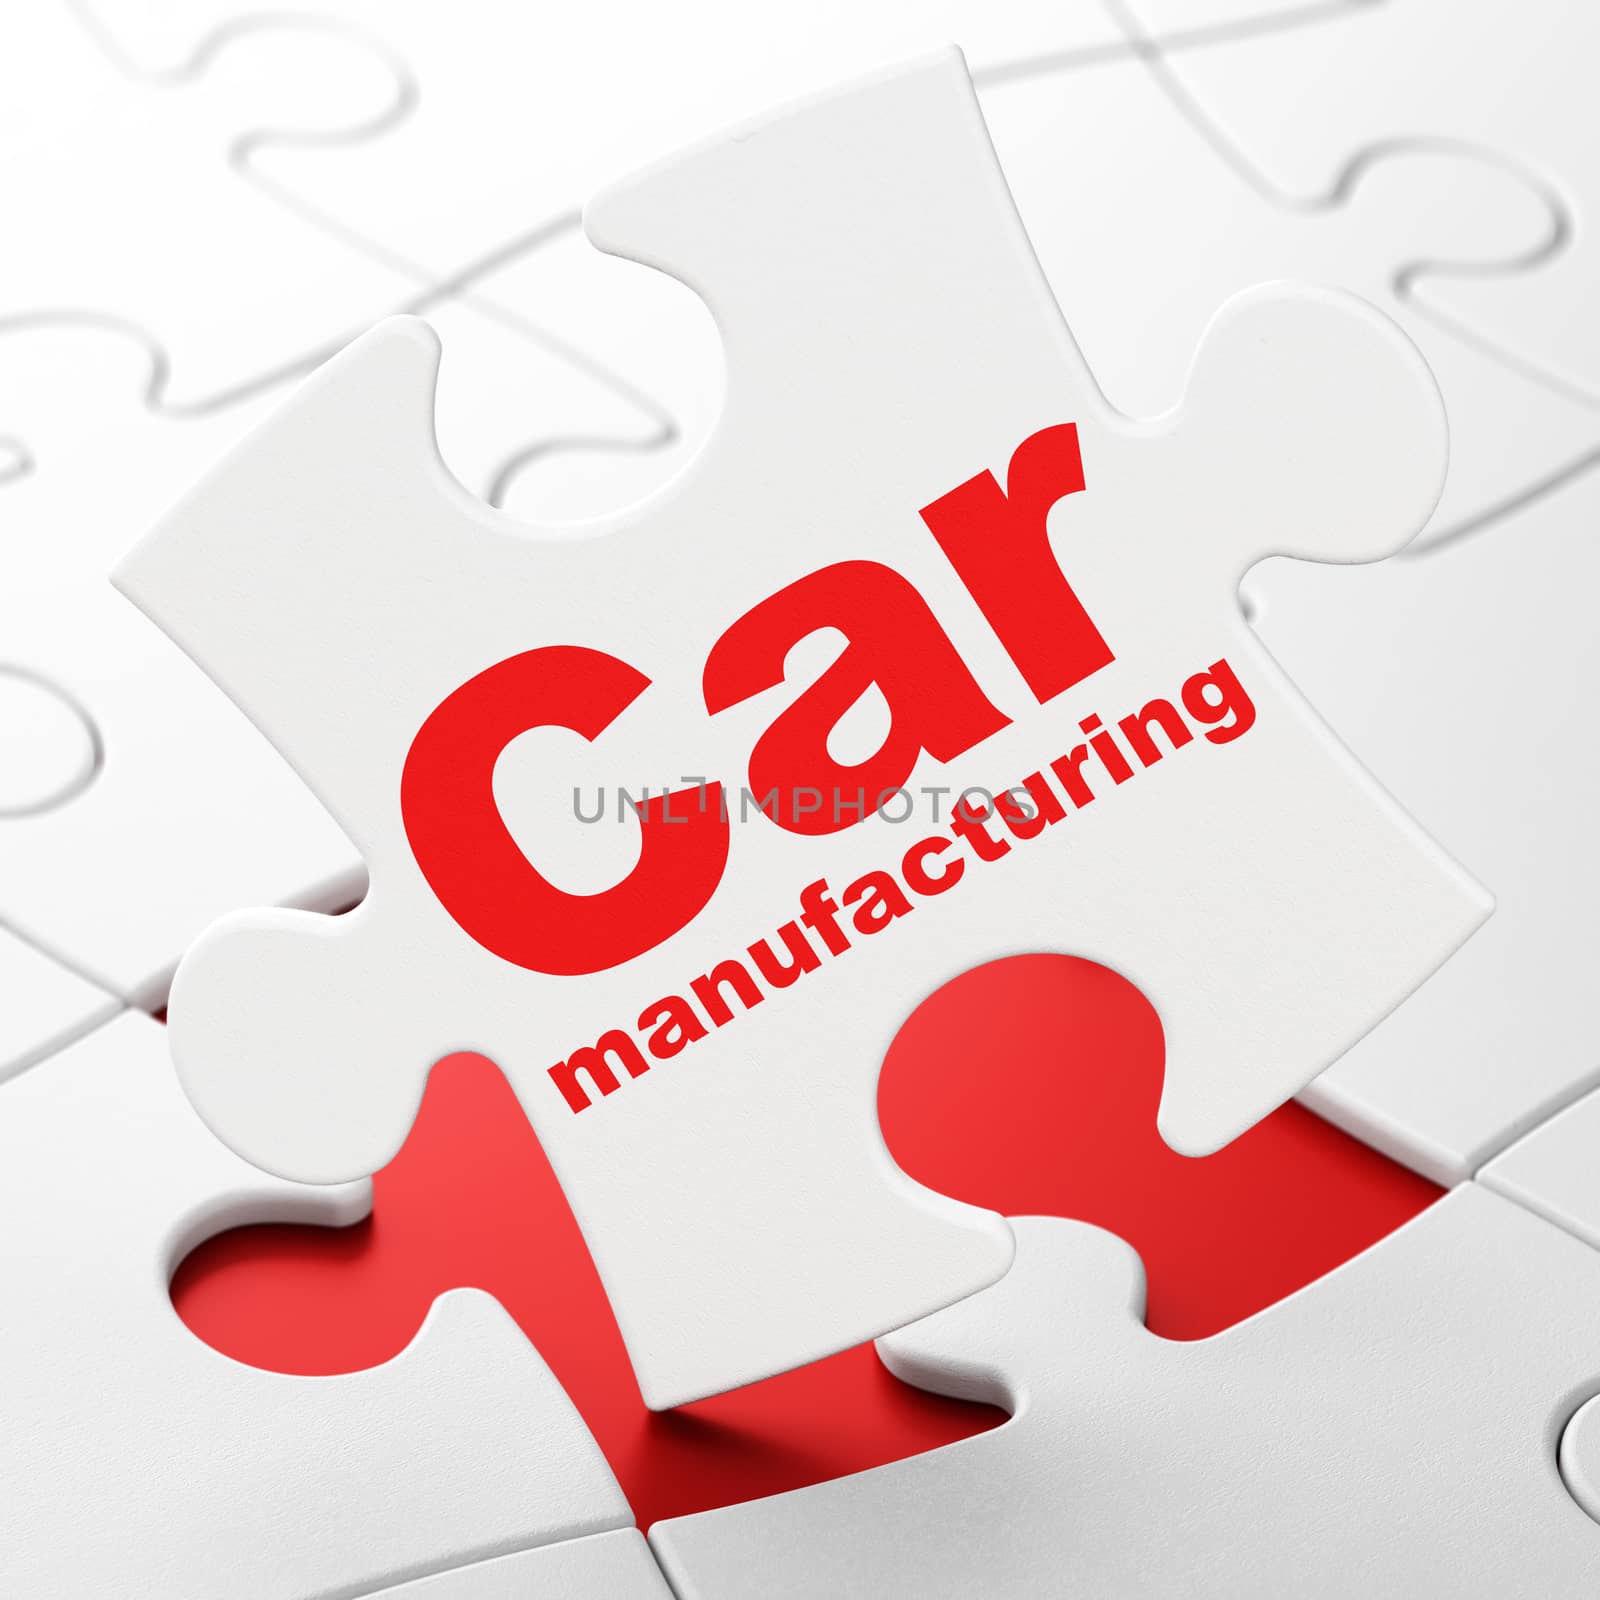 Manufacuring concept: Car Manufacturing on puzzle background by maxkabakov